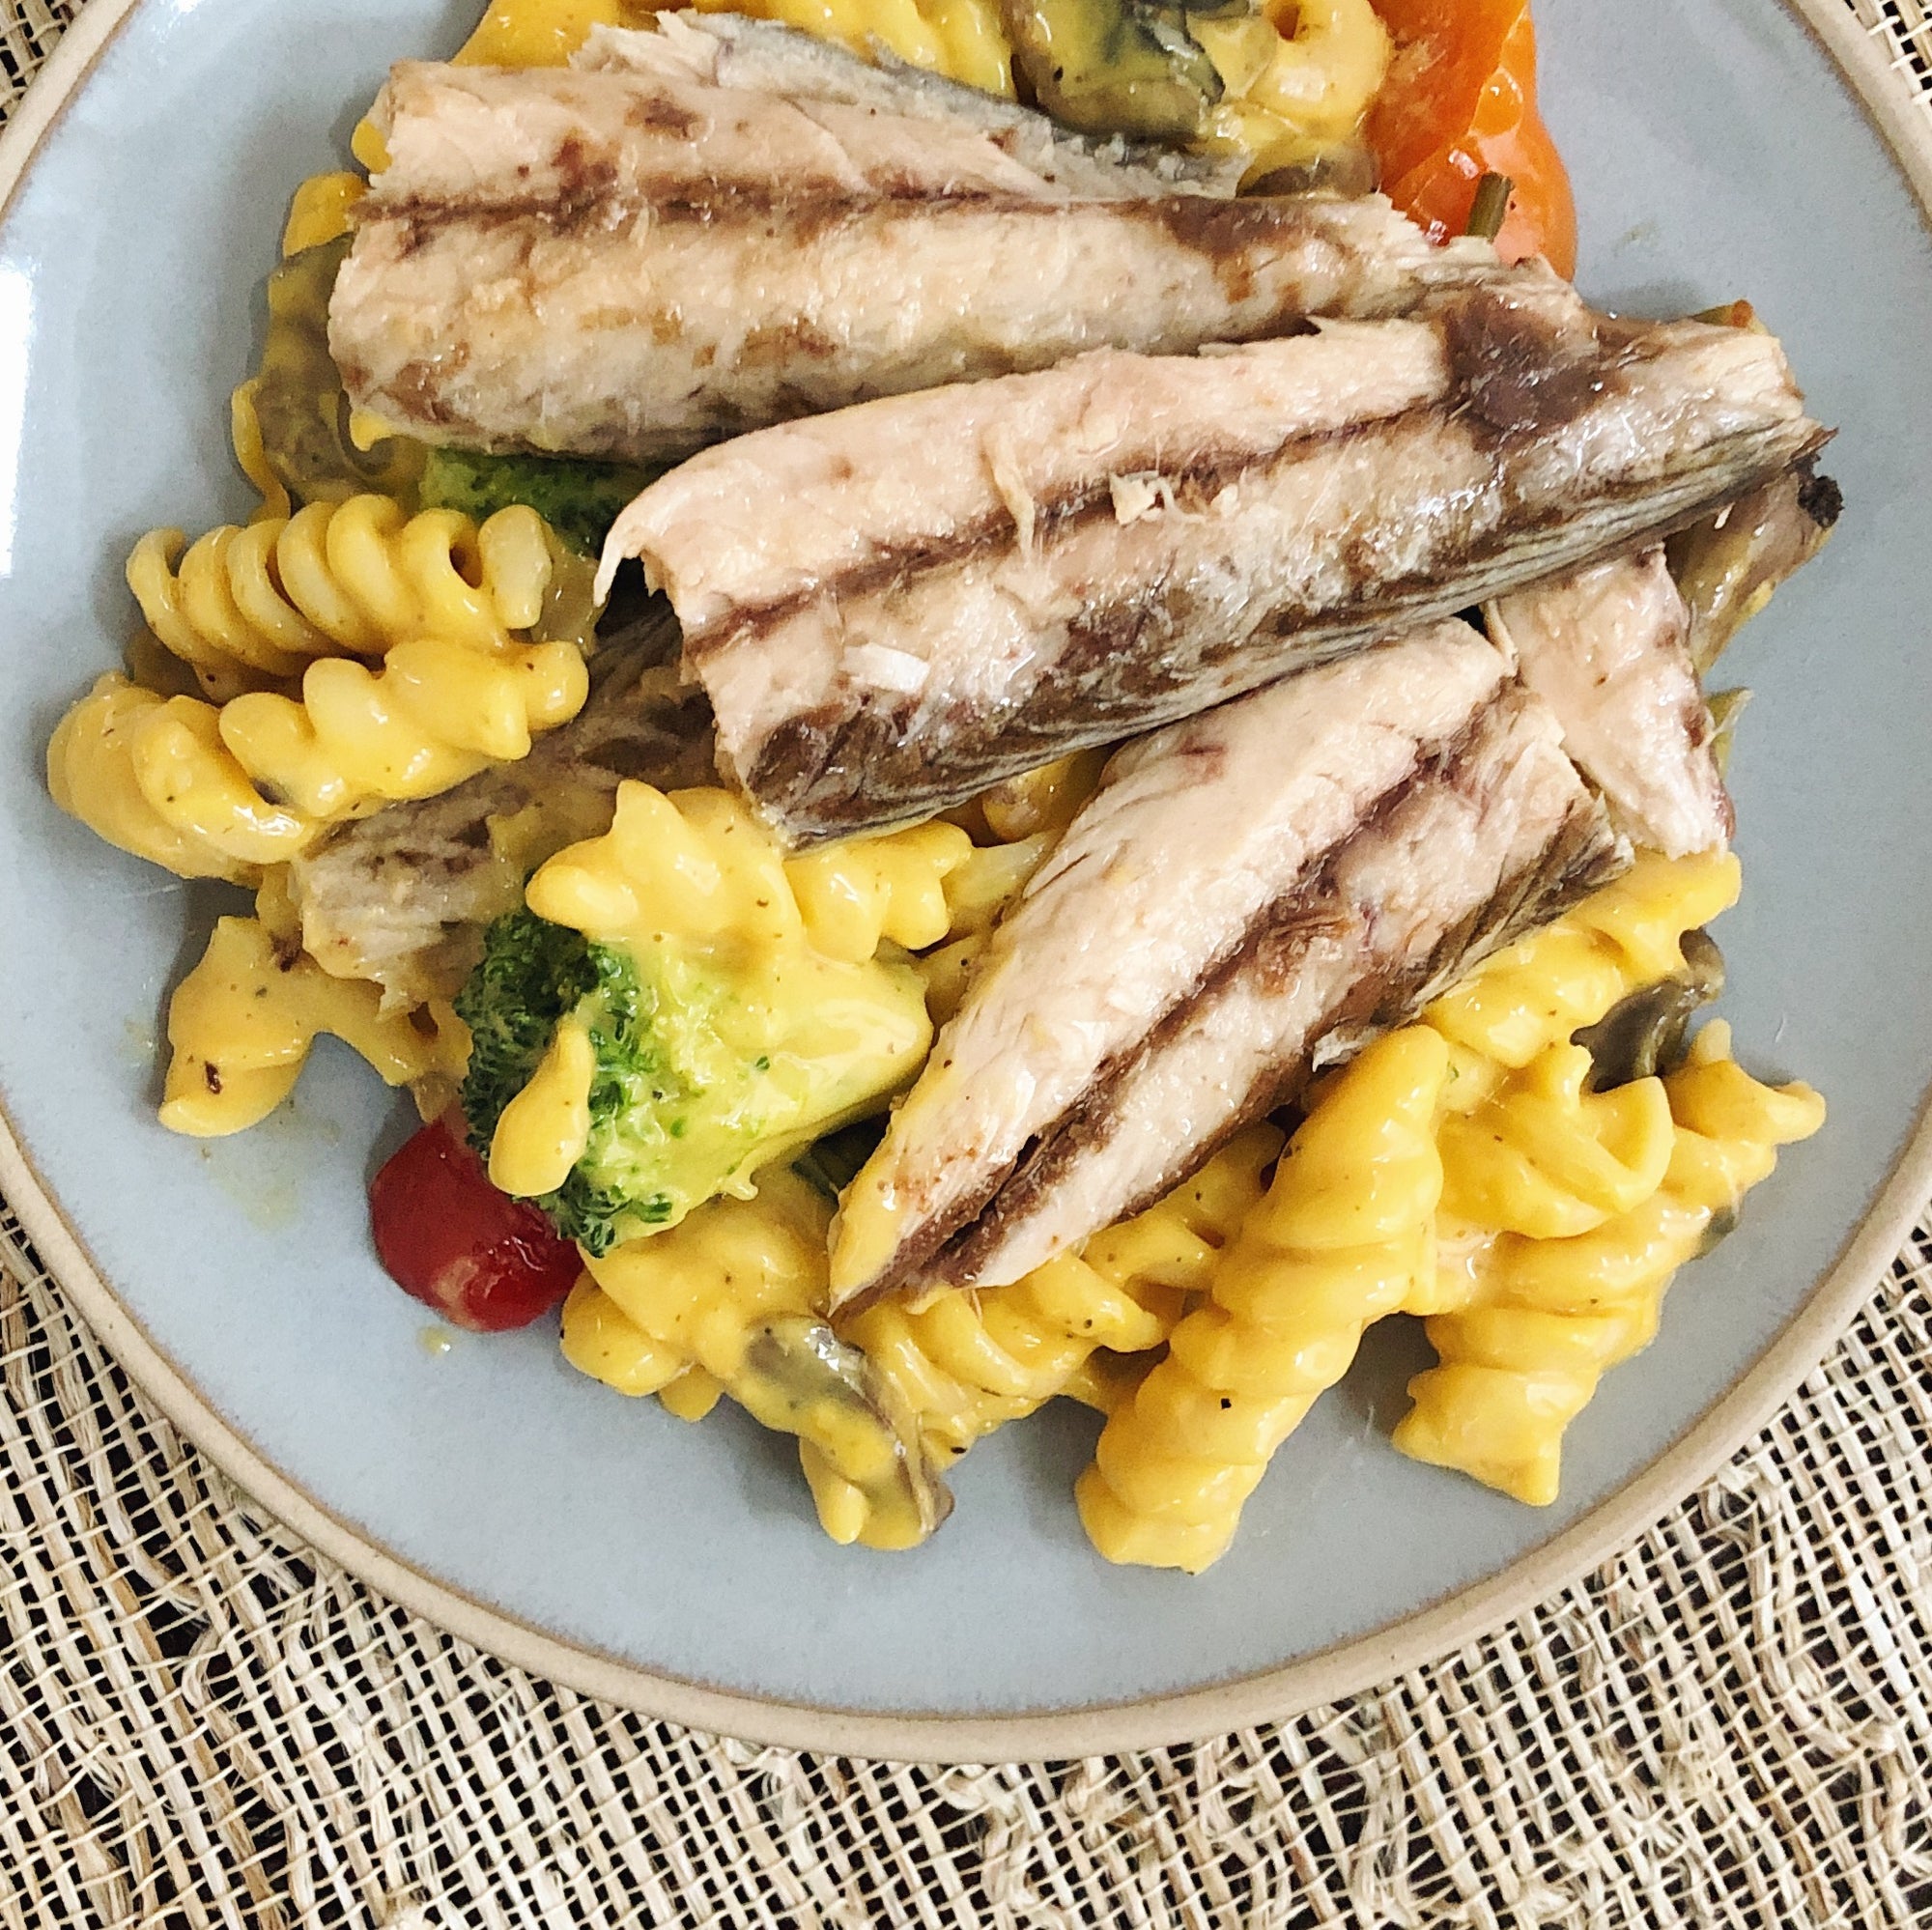 Mackerel fillets in olive oil with macaroni and cheese - Donostia Foods